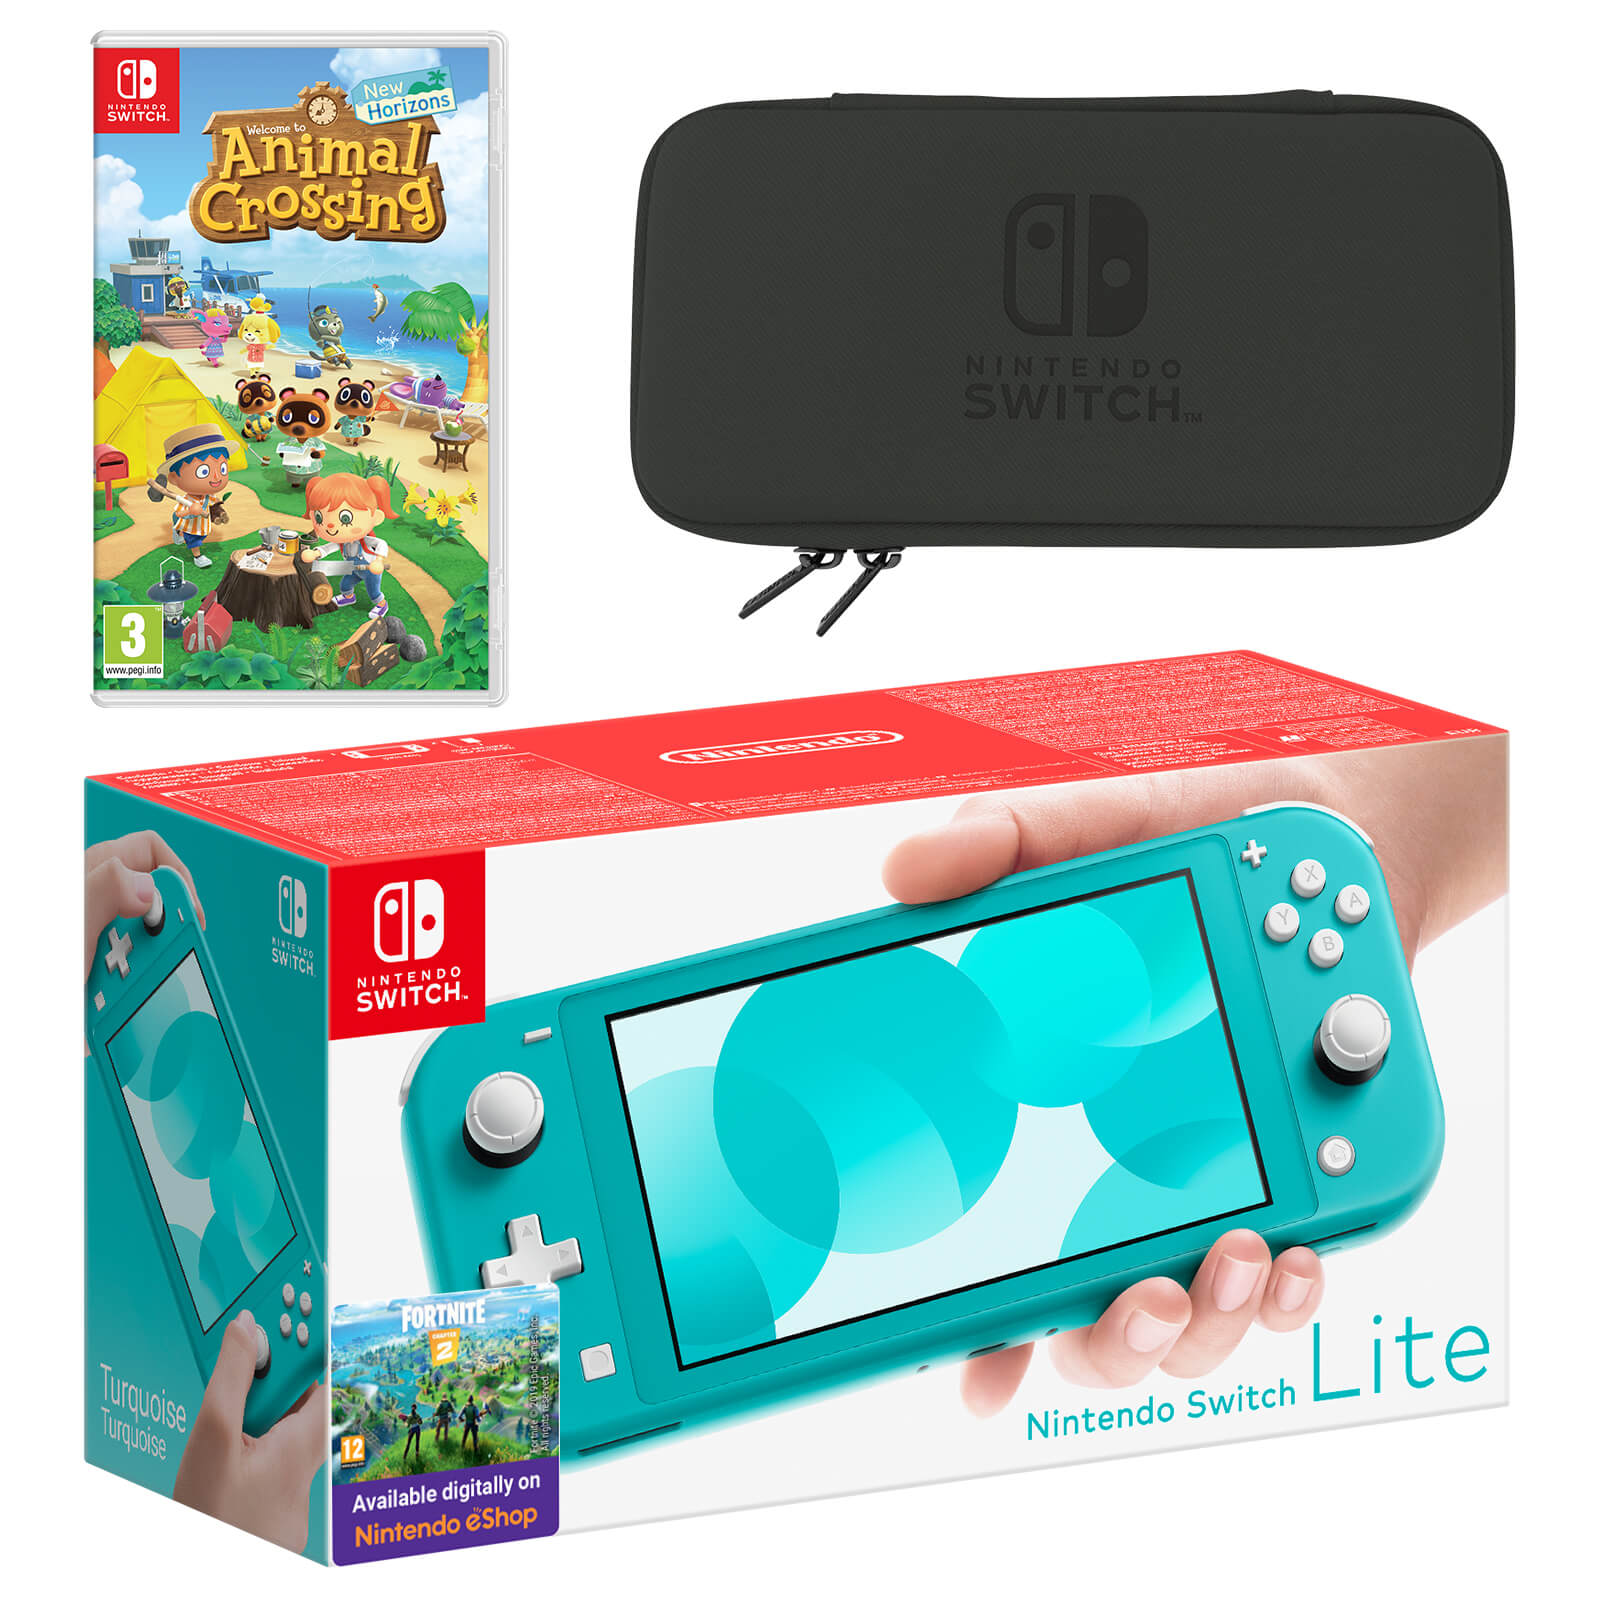 animal crossing and switch lite